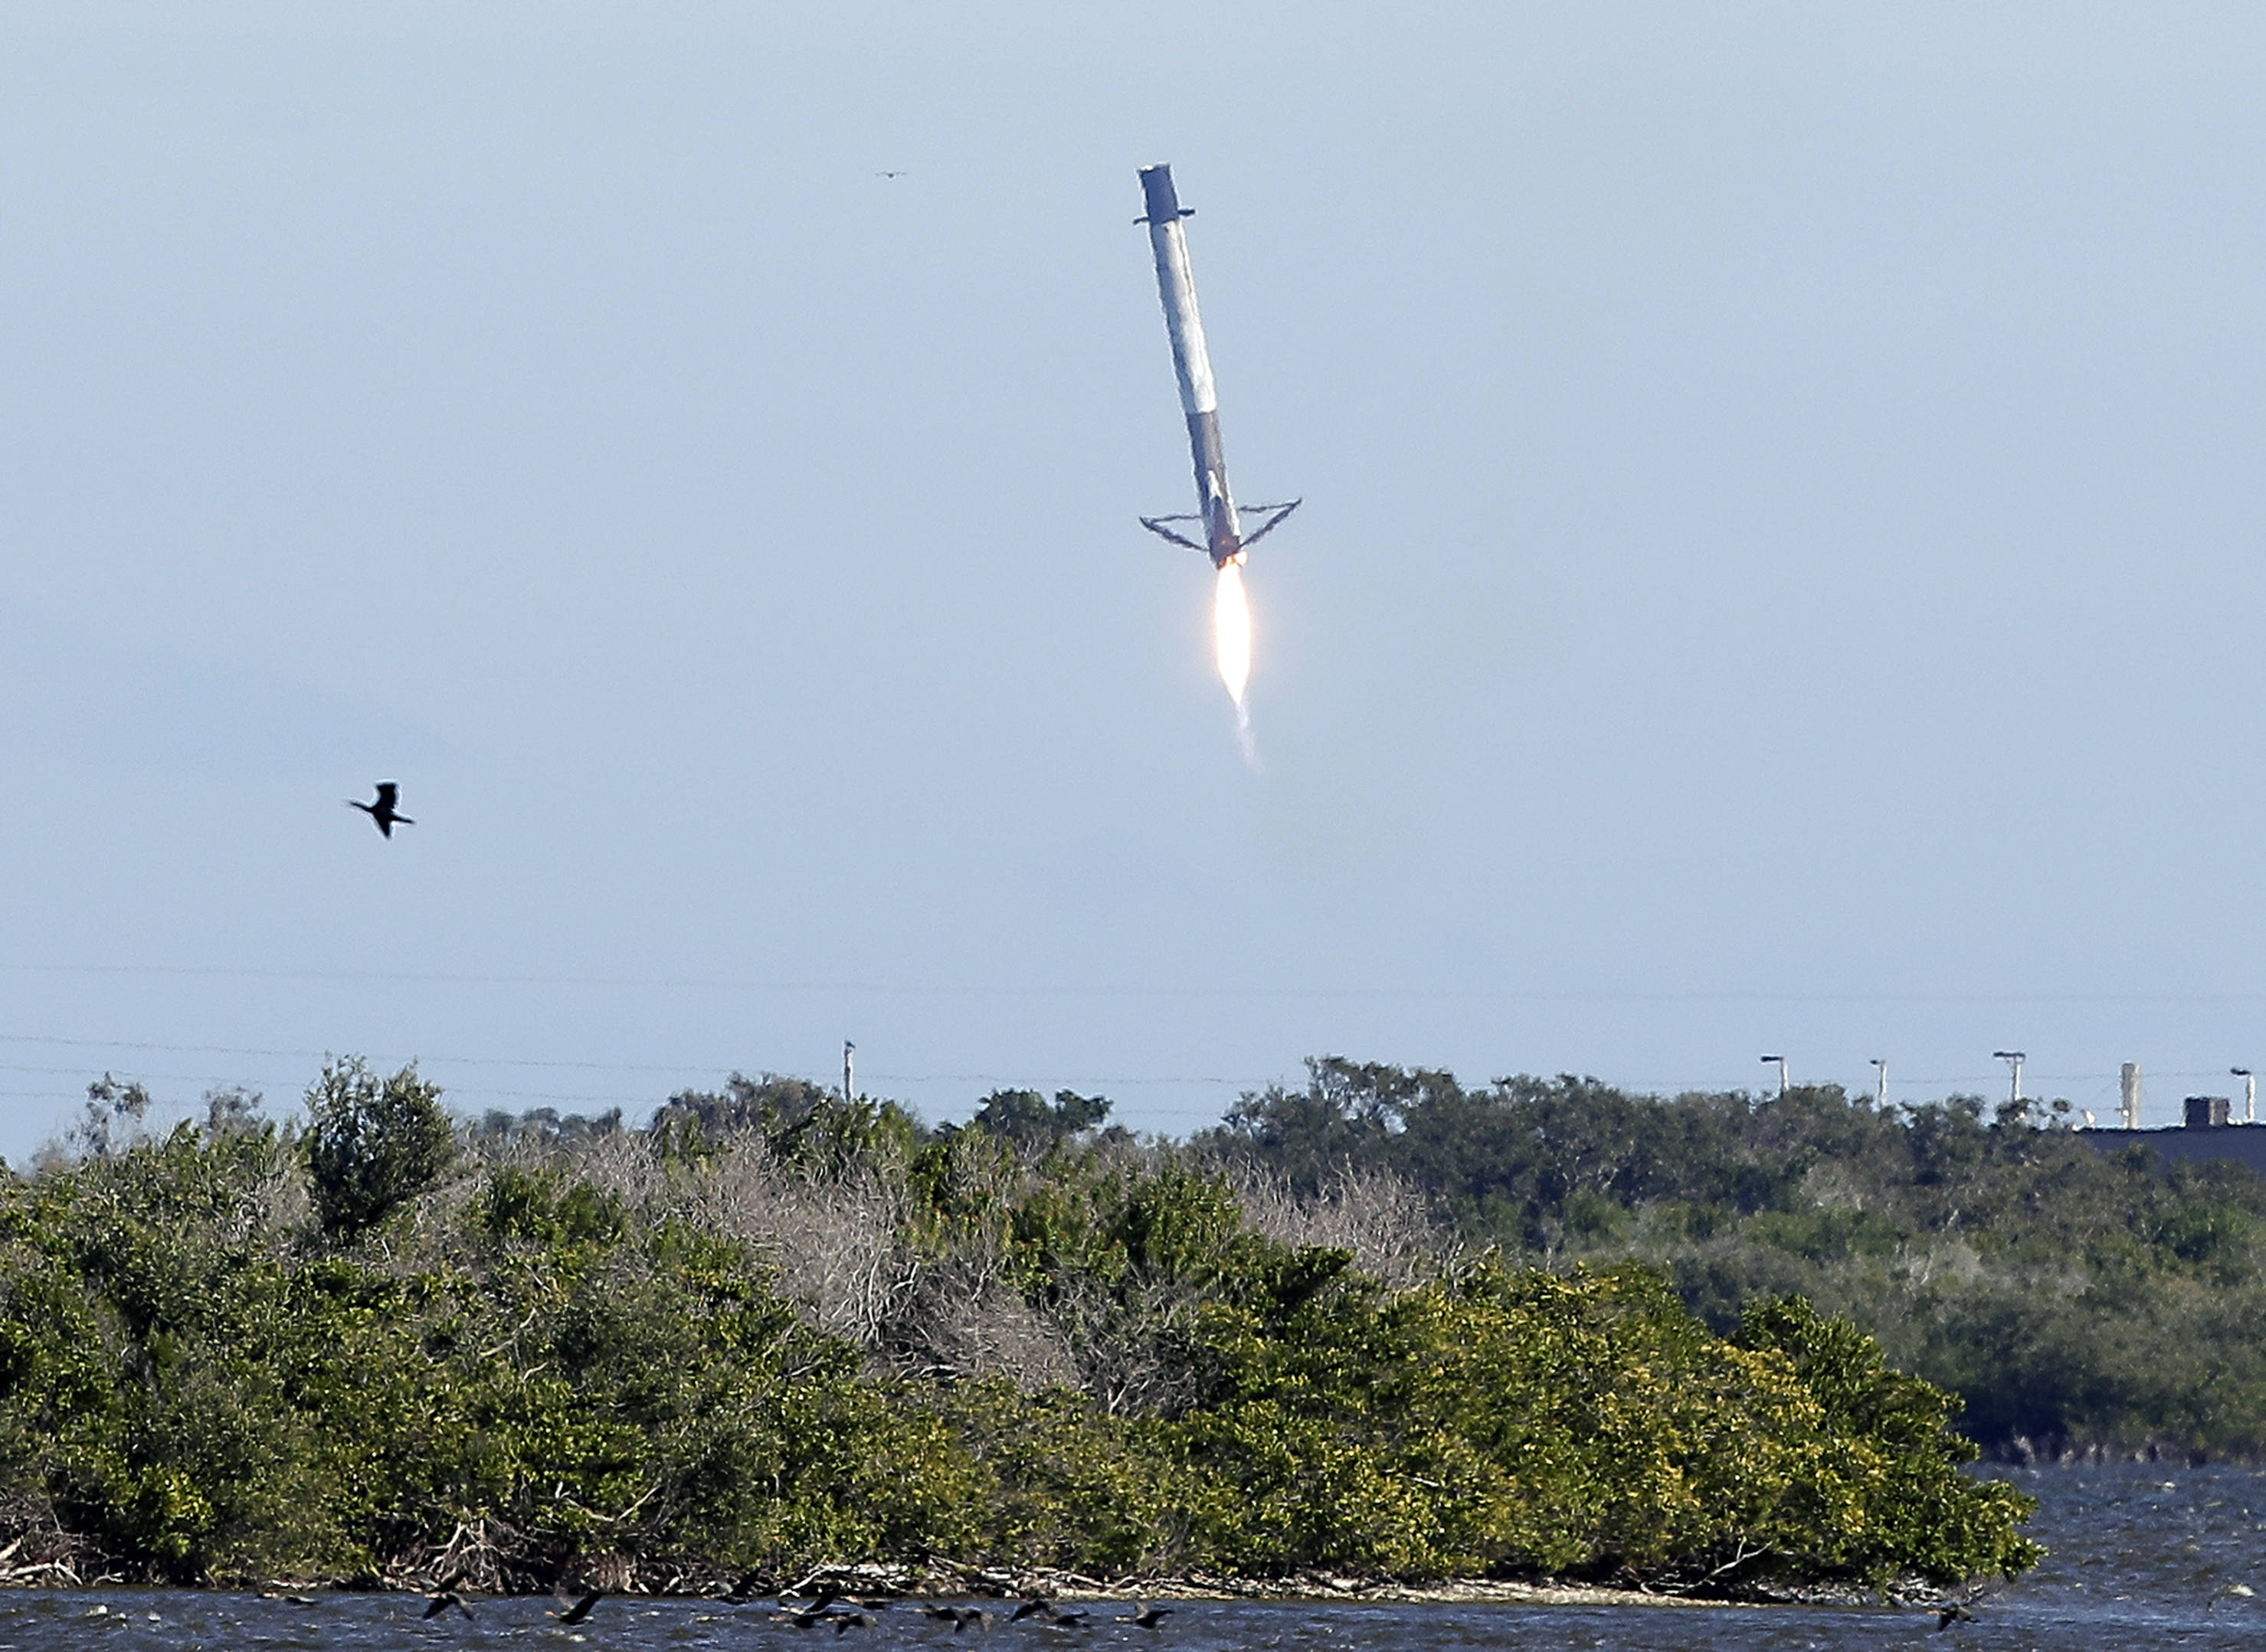 The first-stage booster from a Falcon 9 rocket experiences a control problem during its descent, landing in the Atlantic Ocean just east of the launch site instead of a landing zone at the Cape Canaveral Air Force Station